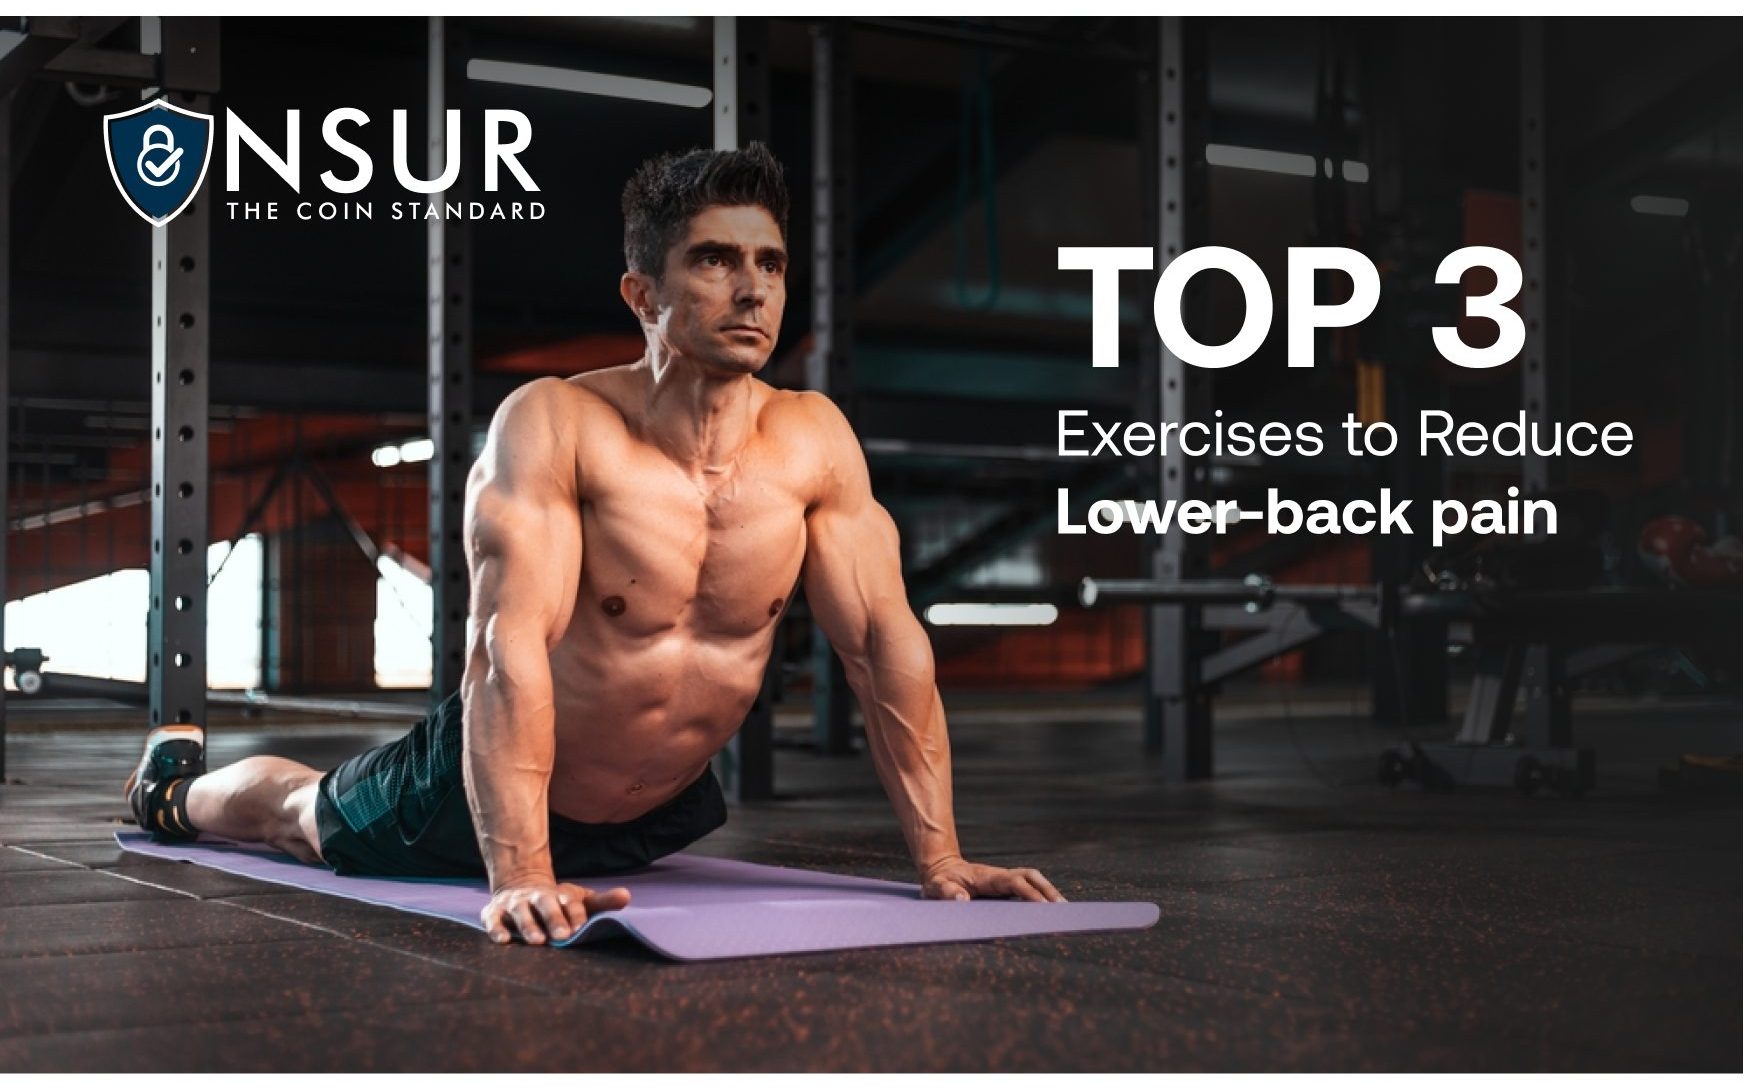 Top 3 Exercises to Reduce Lower-Back Pain – NSUR Blog